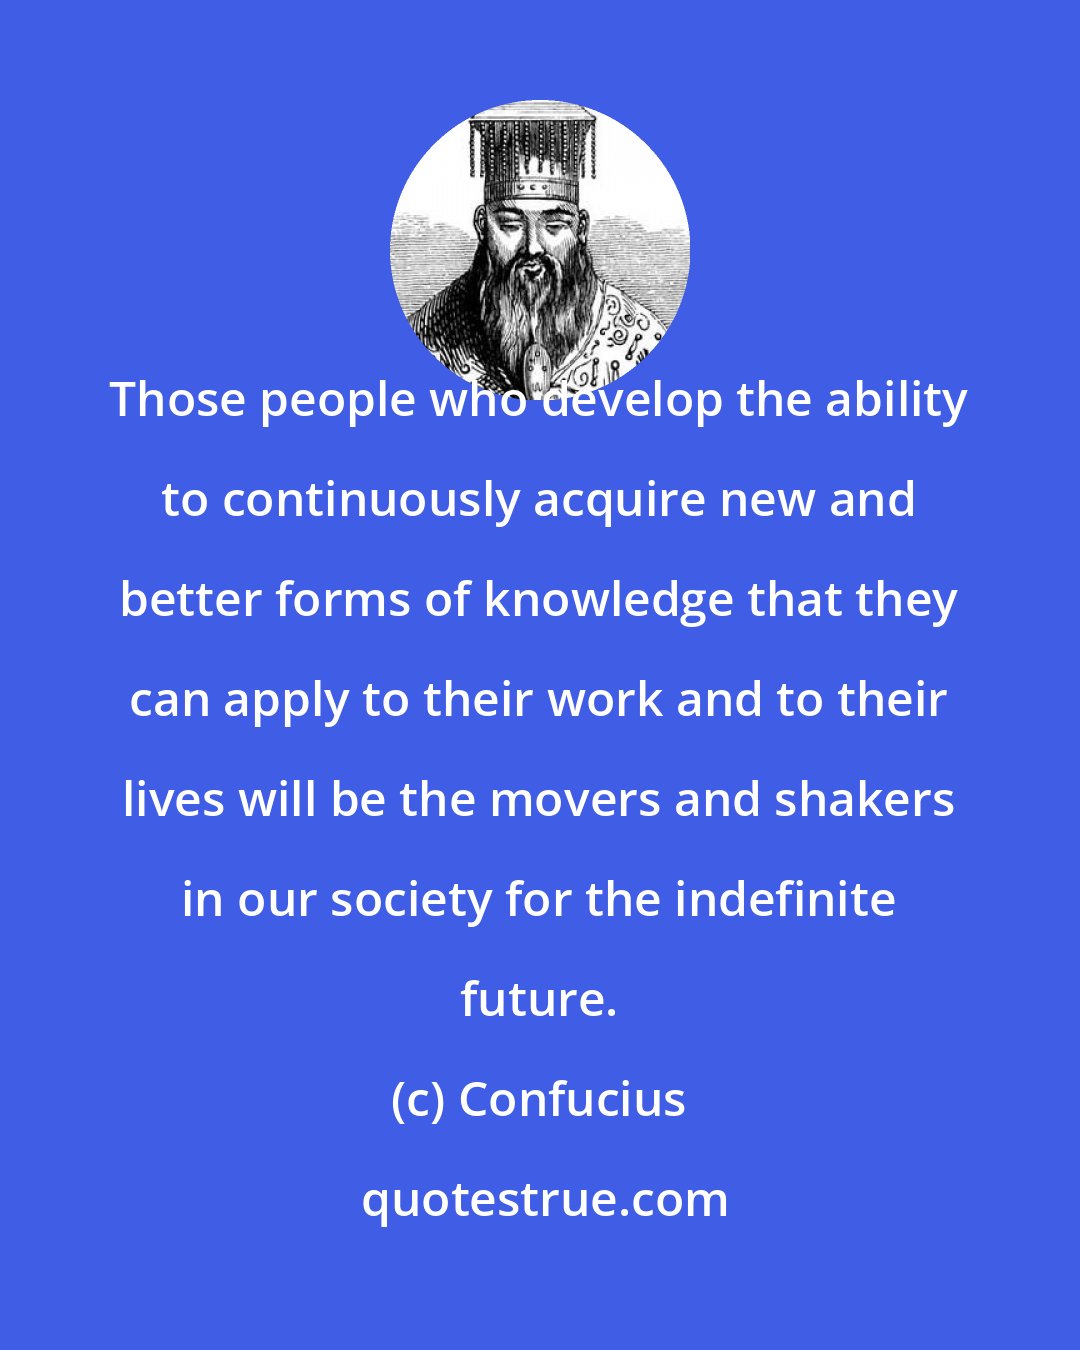 Confucius: Those people who develop the ability to continuously acquire new and better forms of knowledge that they can apply to their work and to their lives will be the movers and shakers in our society for the indefinite future.